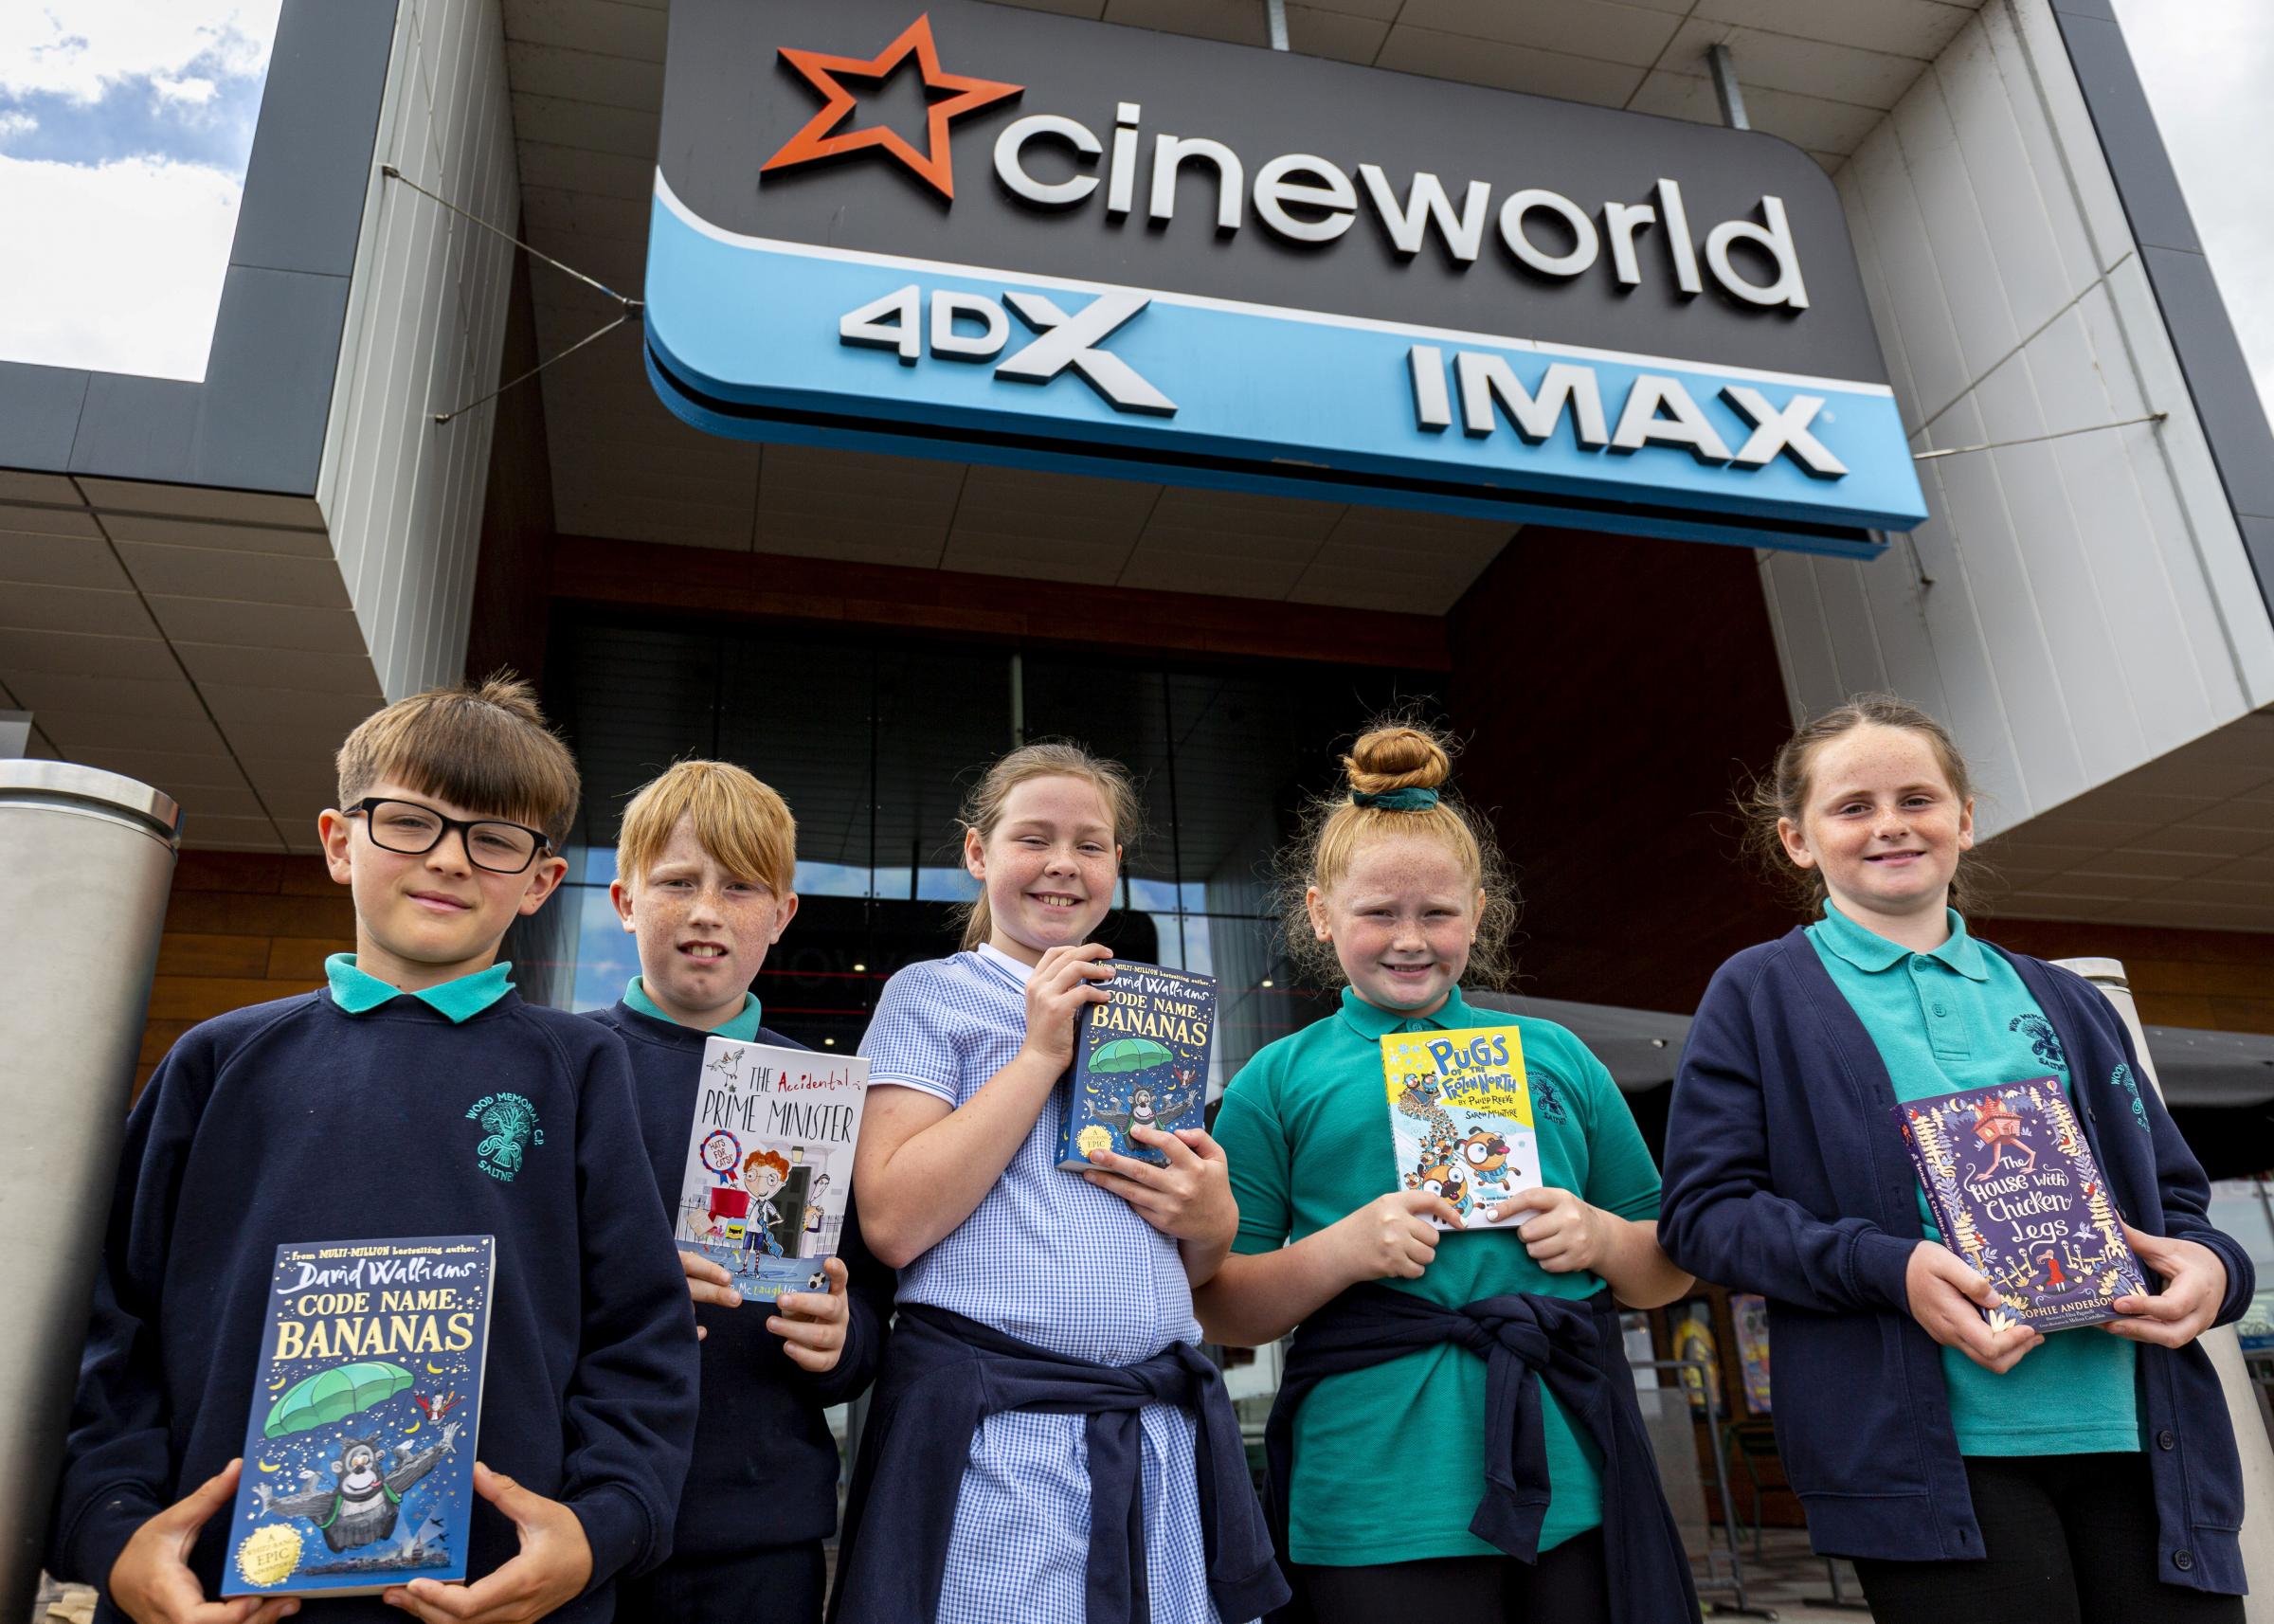 Students holding their new books from a Young Reader’s Programme event, outside Cineworld at Broughton Shopping Park.